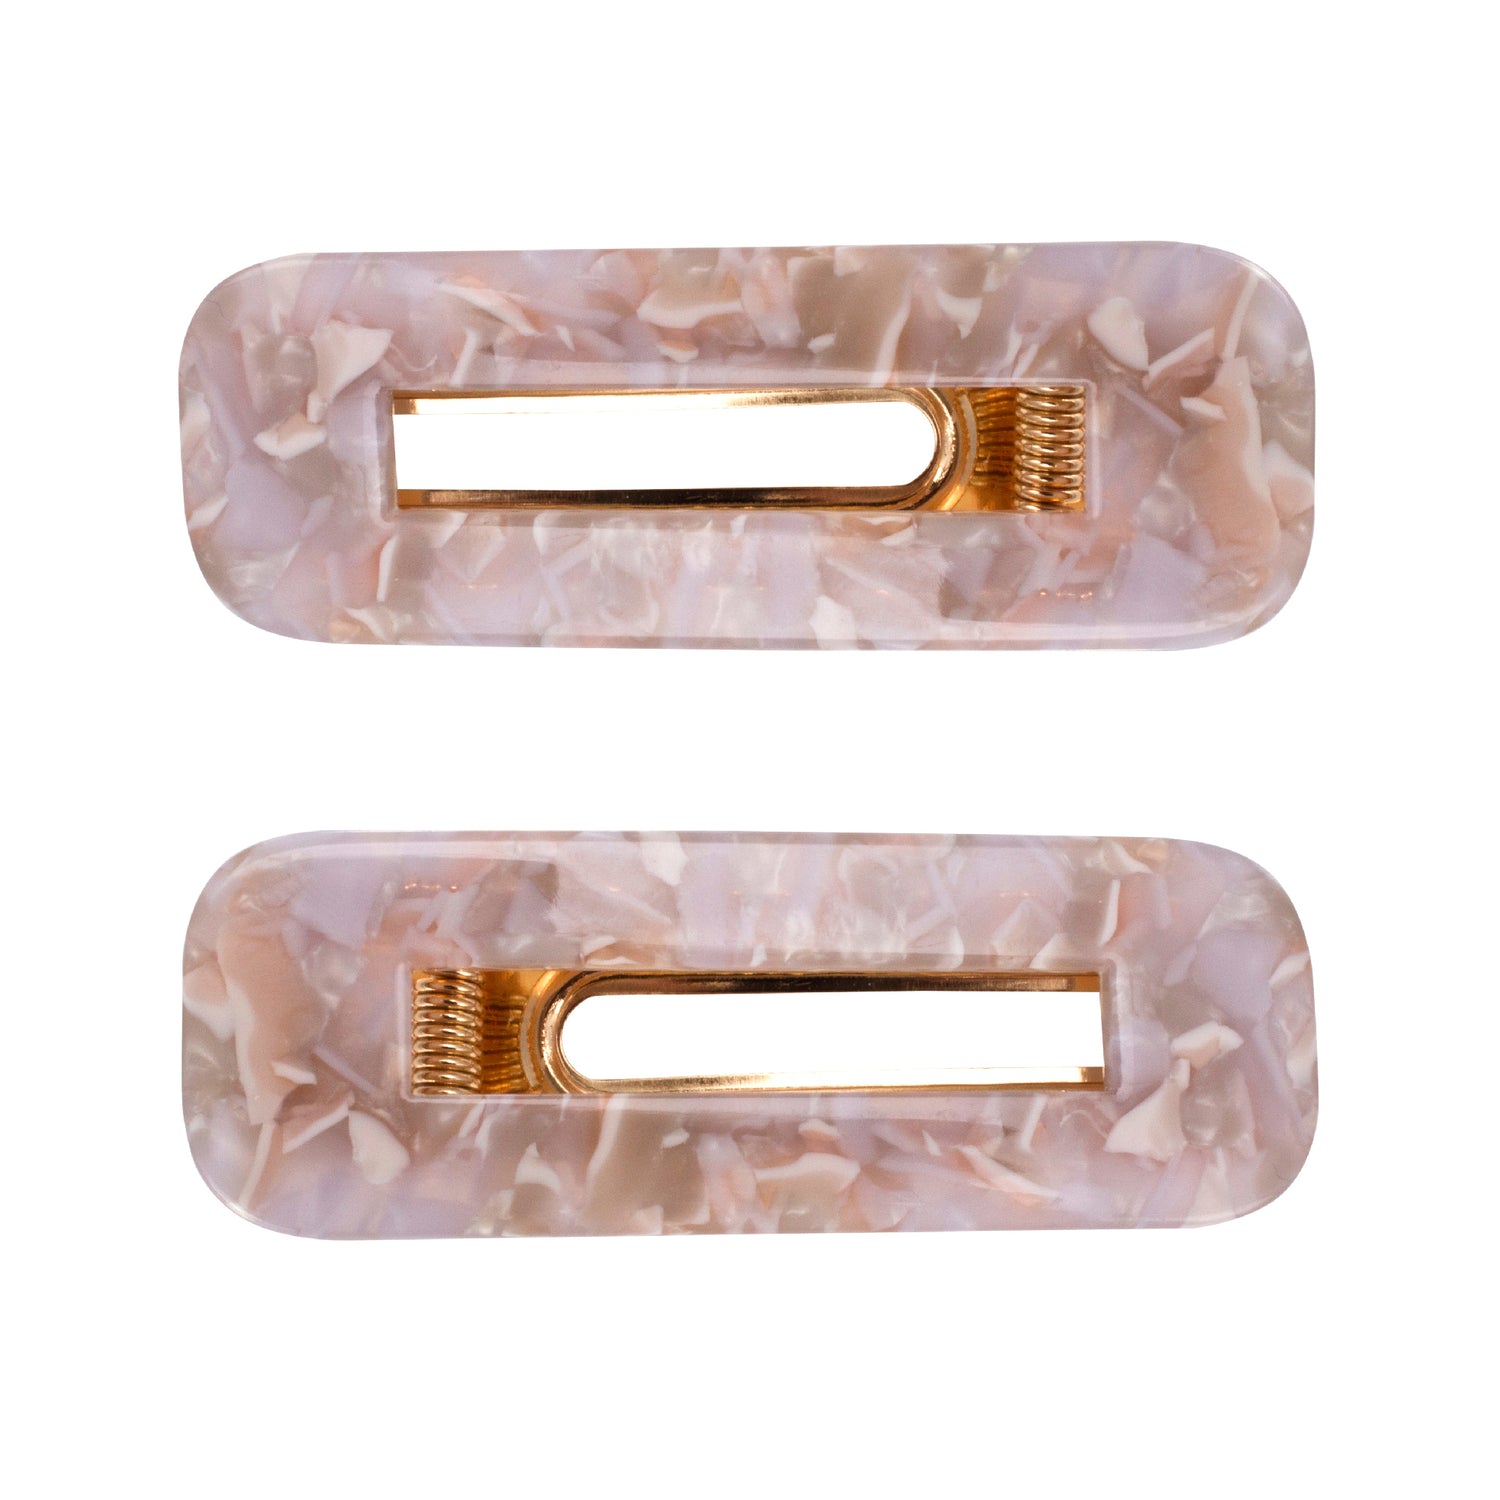 Square Hair Clips - MARBLE EFFECT - Set of Two